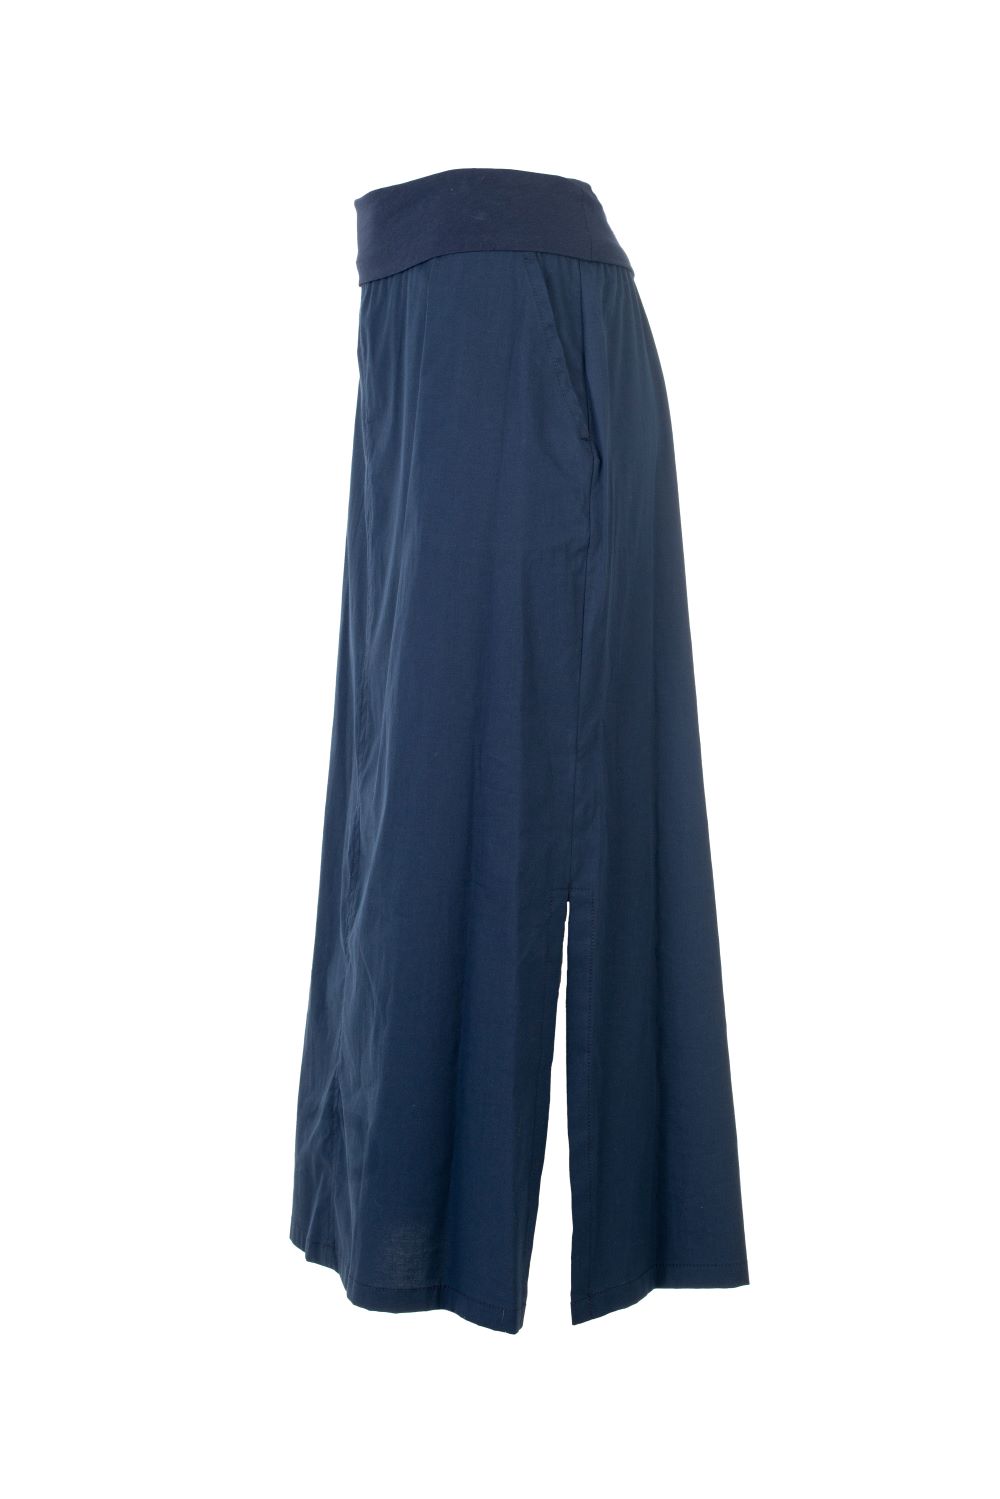 Long Skirt with Large Elasticated Waistband,Side Pockets and Slits